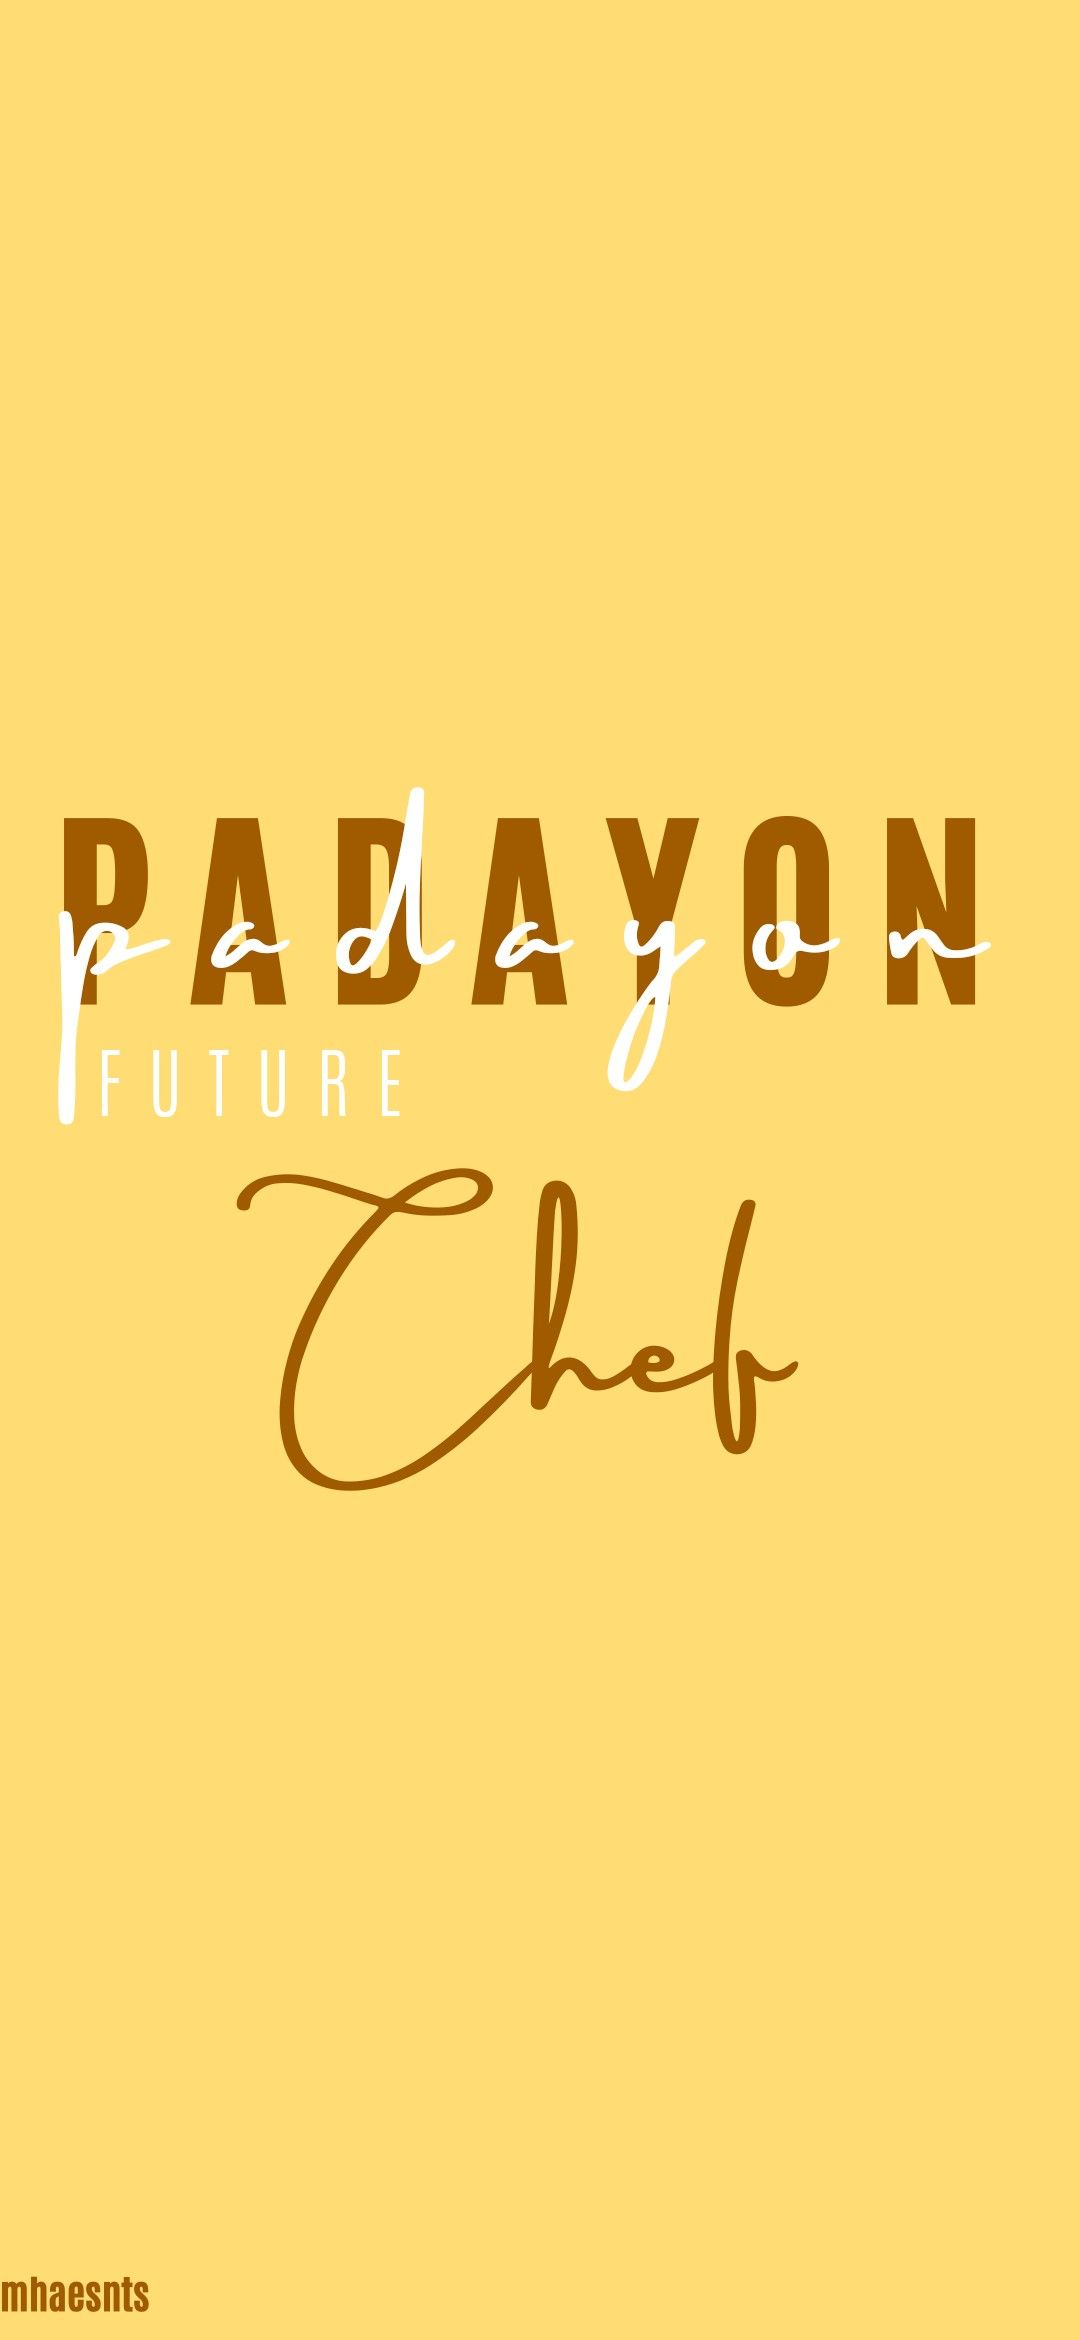 Padayon!!! Future Chef. Future wallpaper, Instagram highlight icons, Aesthetic wallpaper